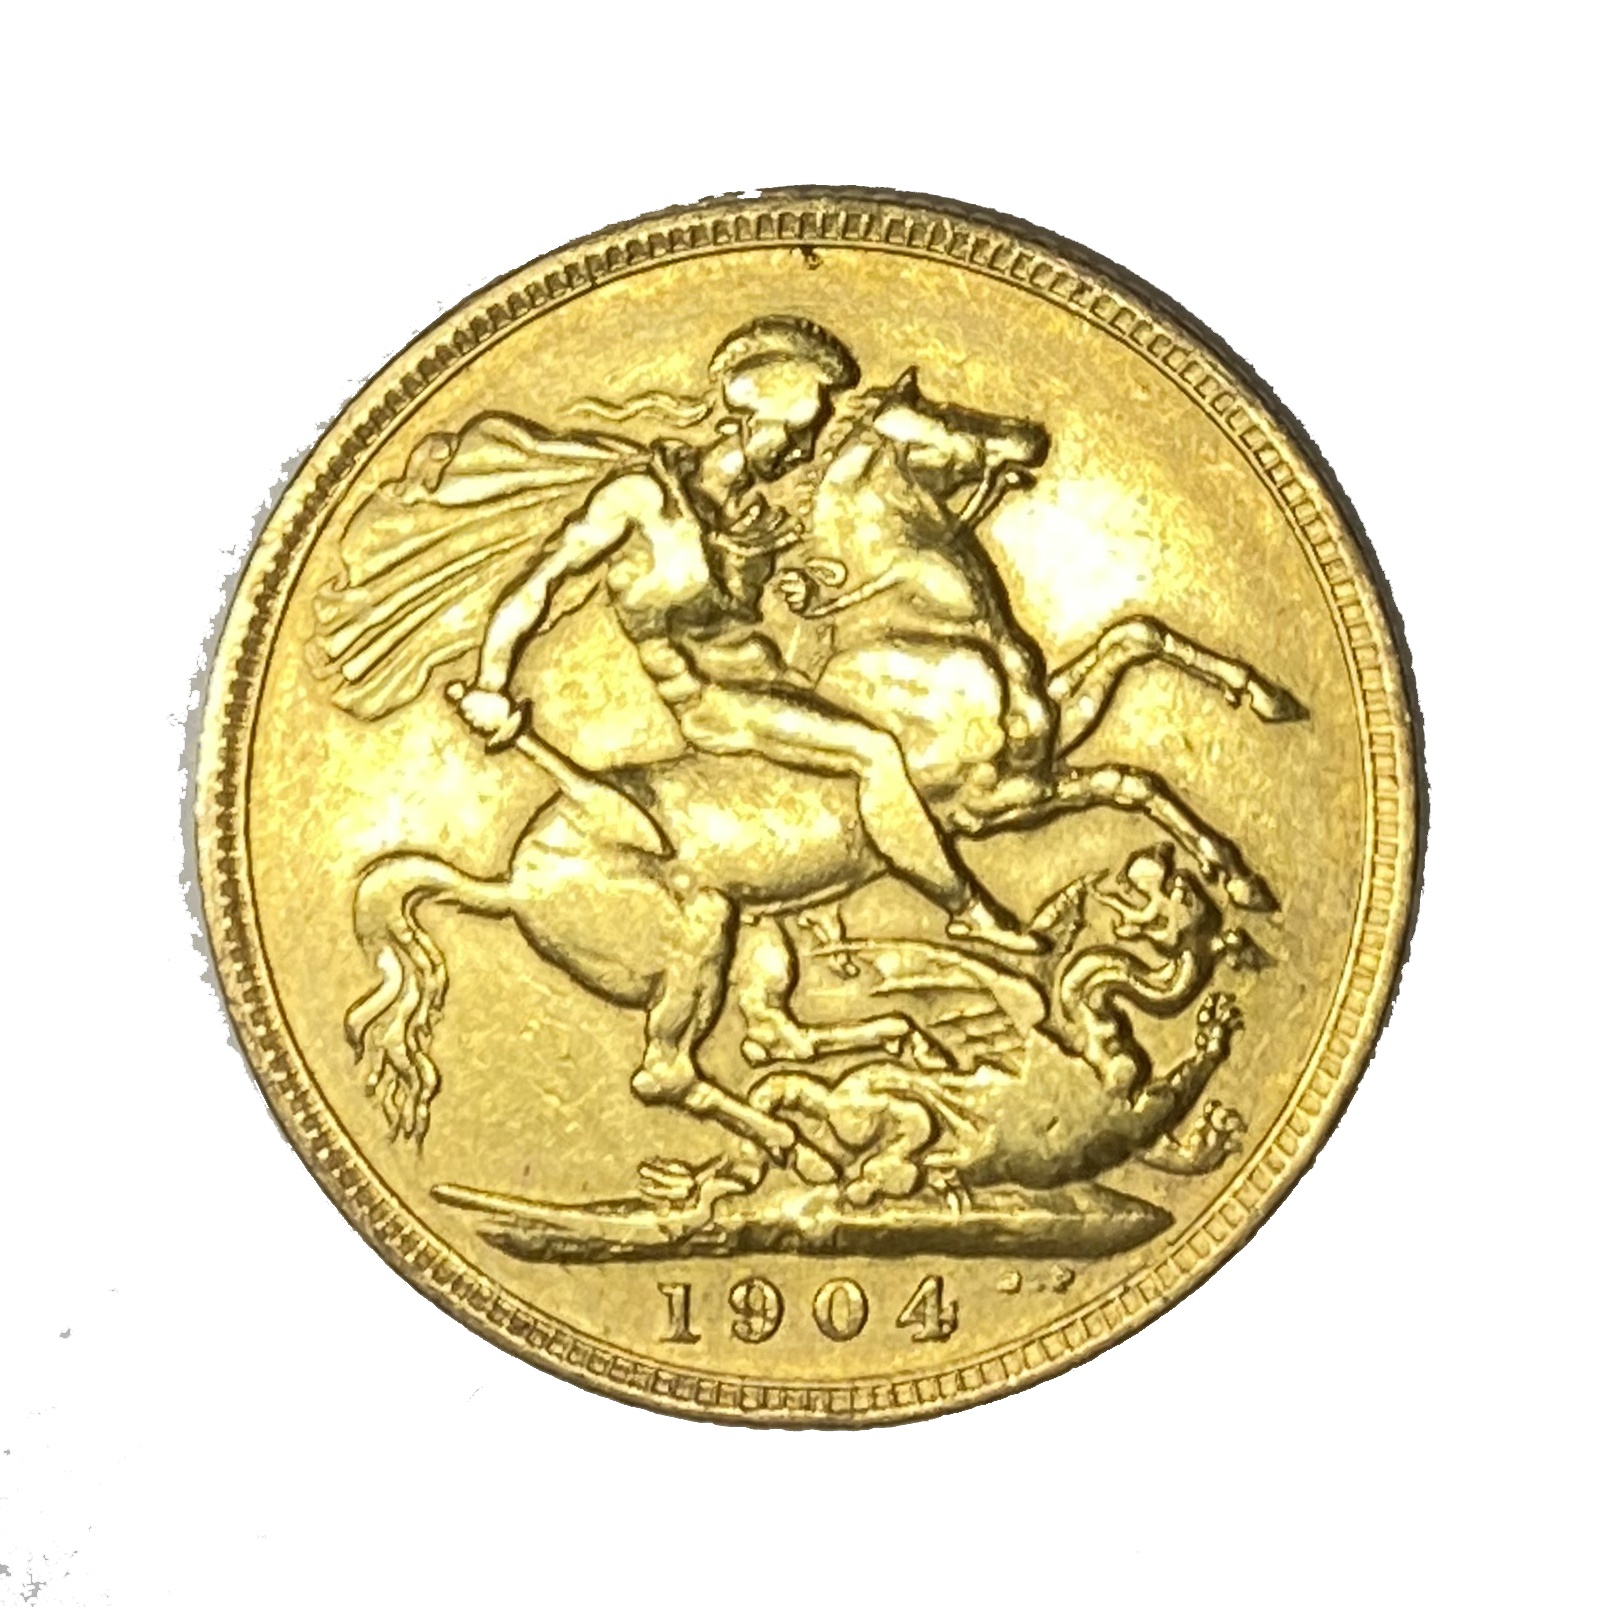 Edward VII gold Sovereign coin, 1904 - Image 2 of 2